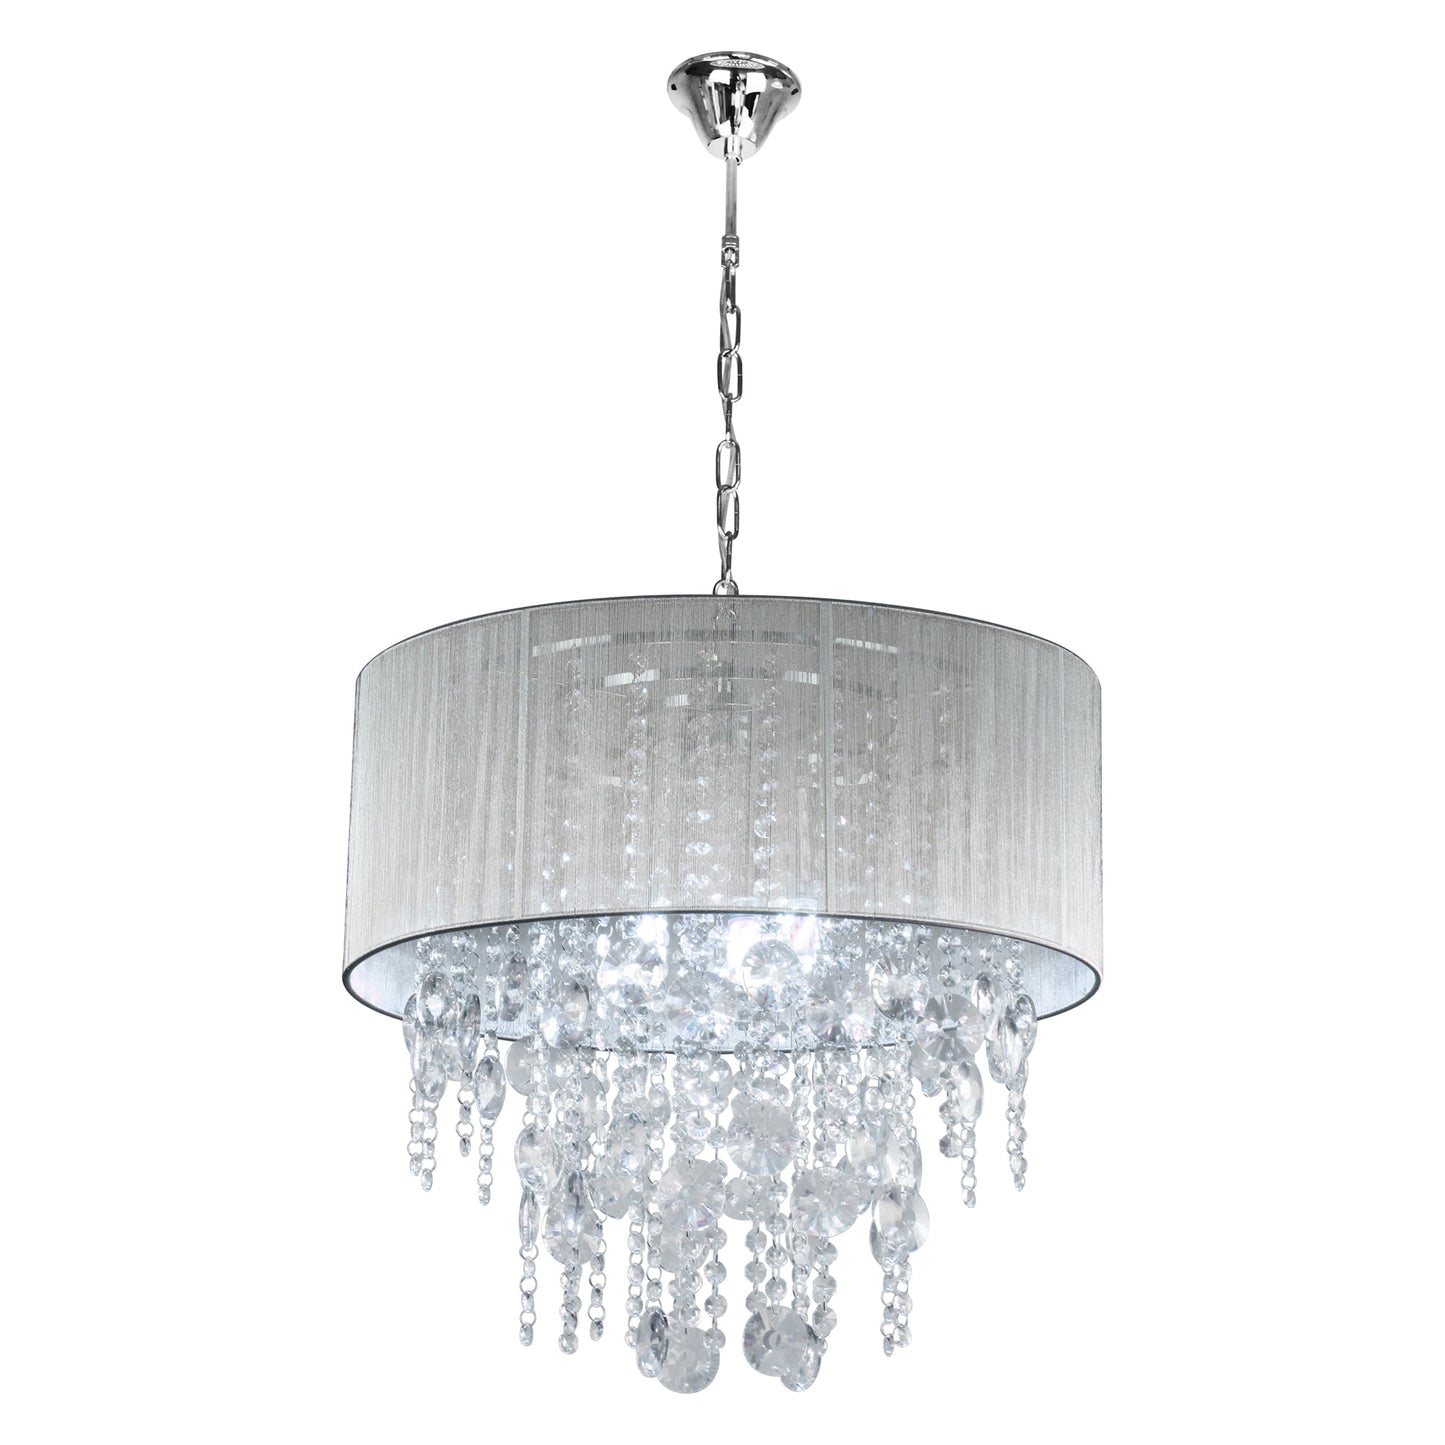 22" H Modern Crystals Chandelier Light With Shade,Crystal 5-light Drum Chandelier,E26 Base,Pendant Light Fixture, Sliver Finish